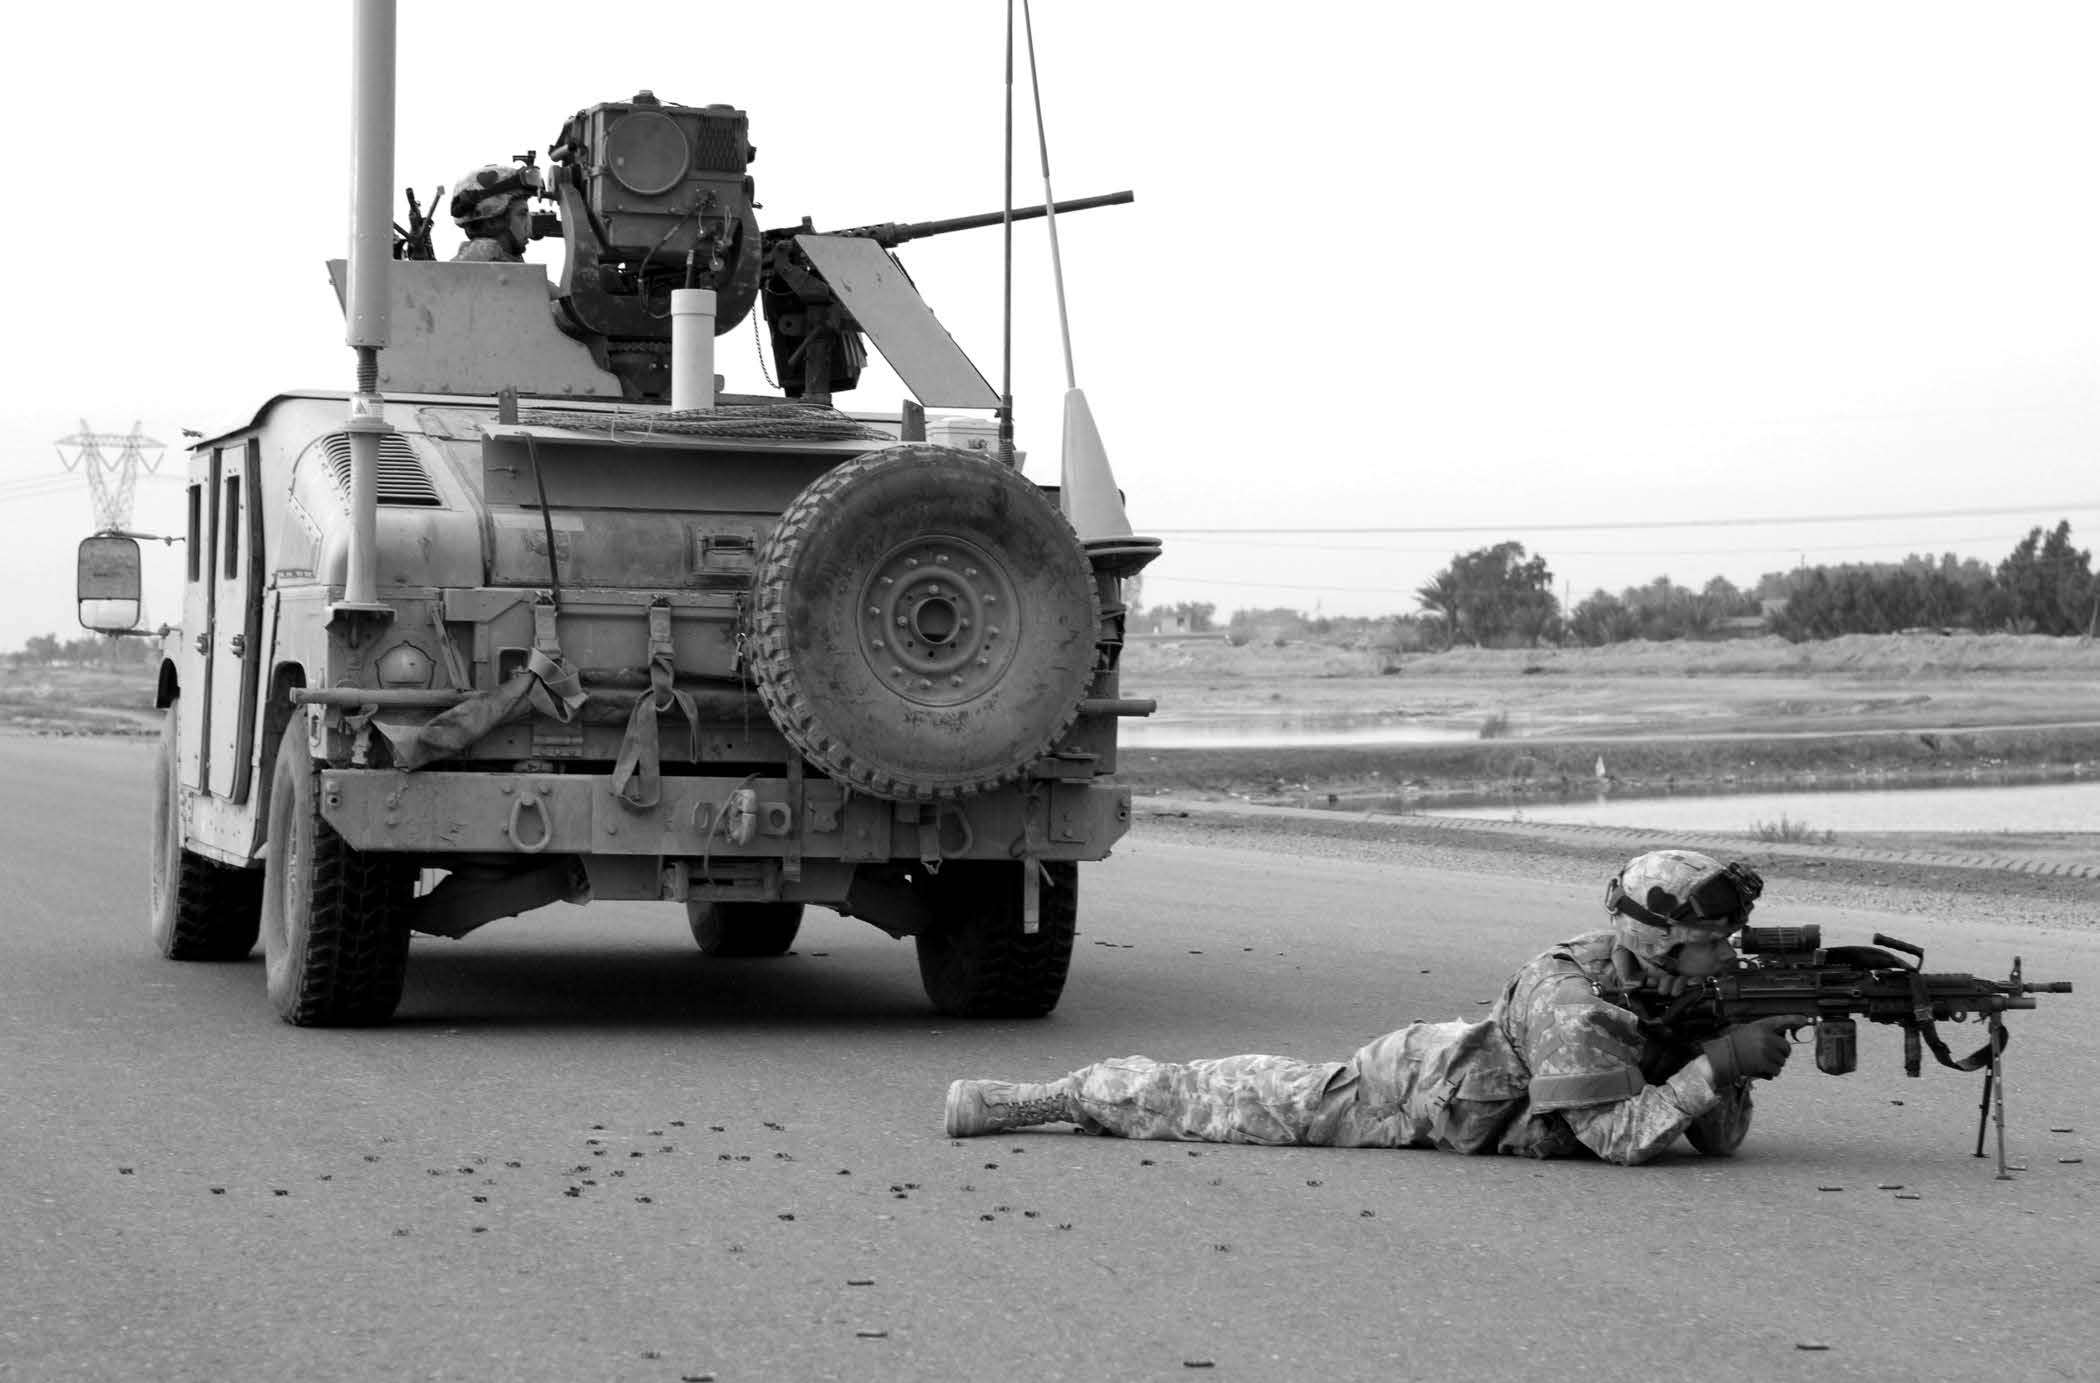 Brass shell casings lie scattered in the road as U.S. Army soldiers from the 101st Airborne Division provide security after an altercation in Baghdad, Iraq, on February 22, 2006. Courtesy of DoD.